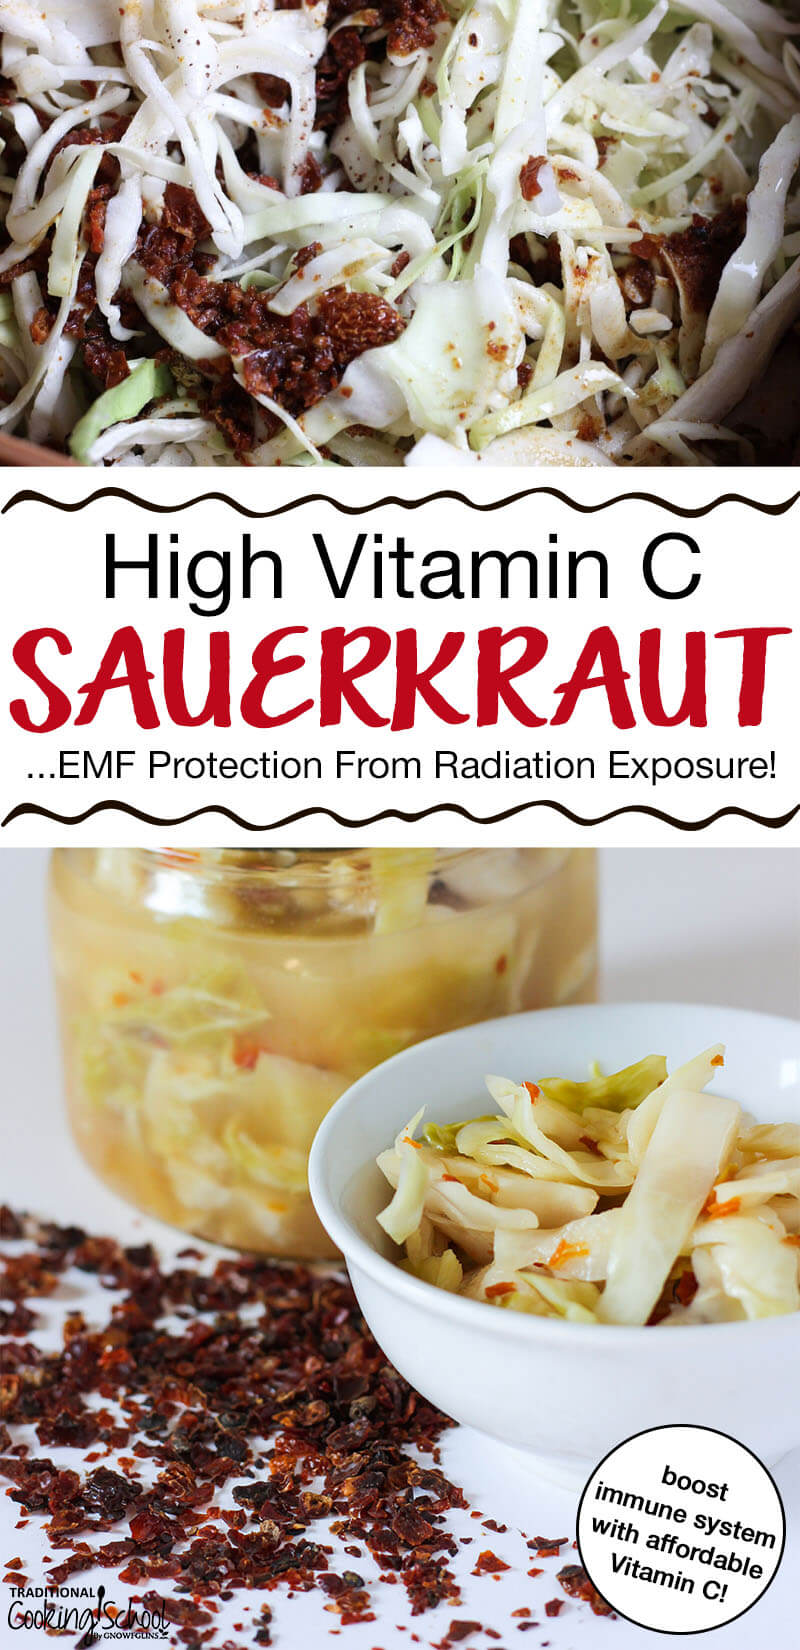 white bowl of sauerkraut with rose hips in front of glass jar full of sauerkraut and brine with text overlay: "High Vitamin C Sauerkraut (EMF Protection From Radiation Exposure!)"